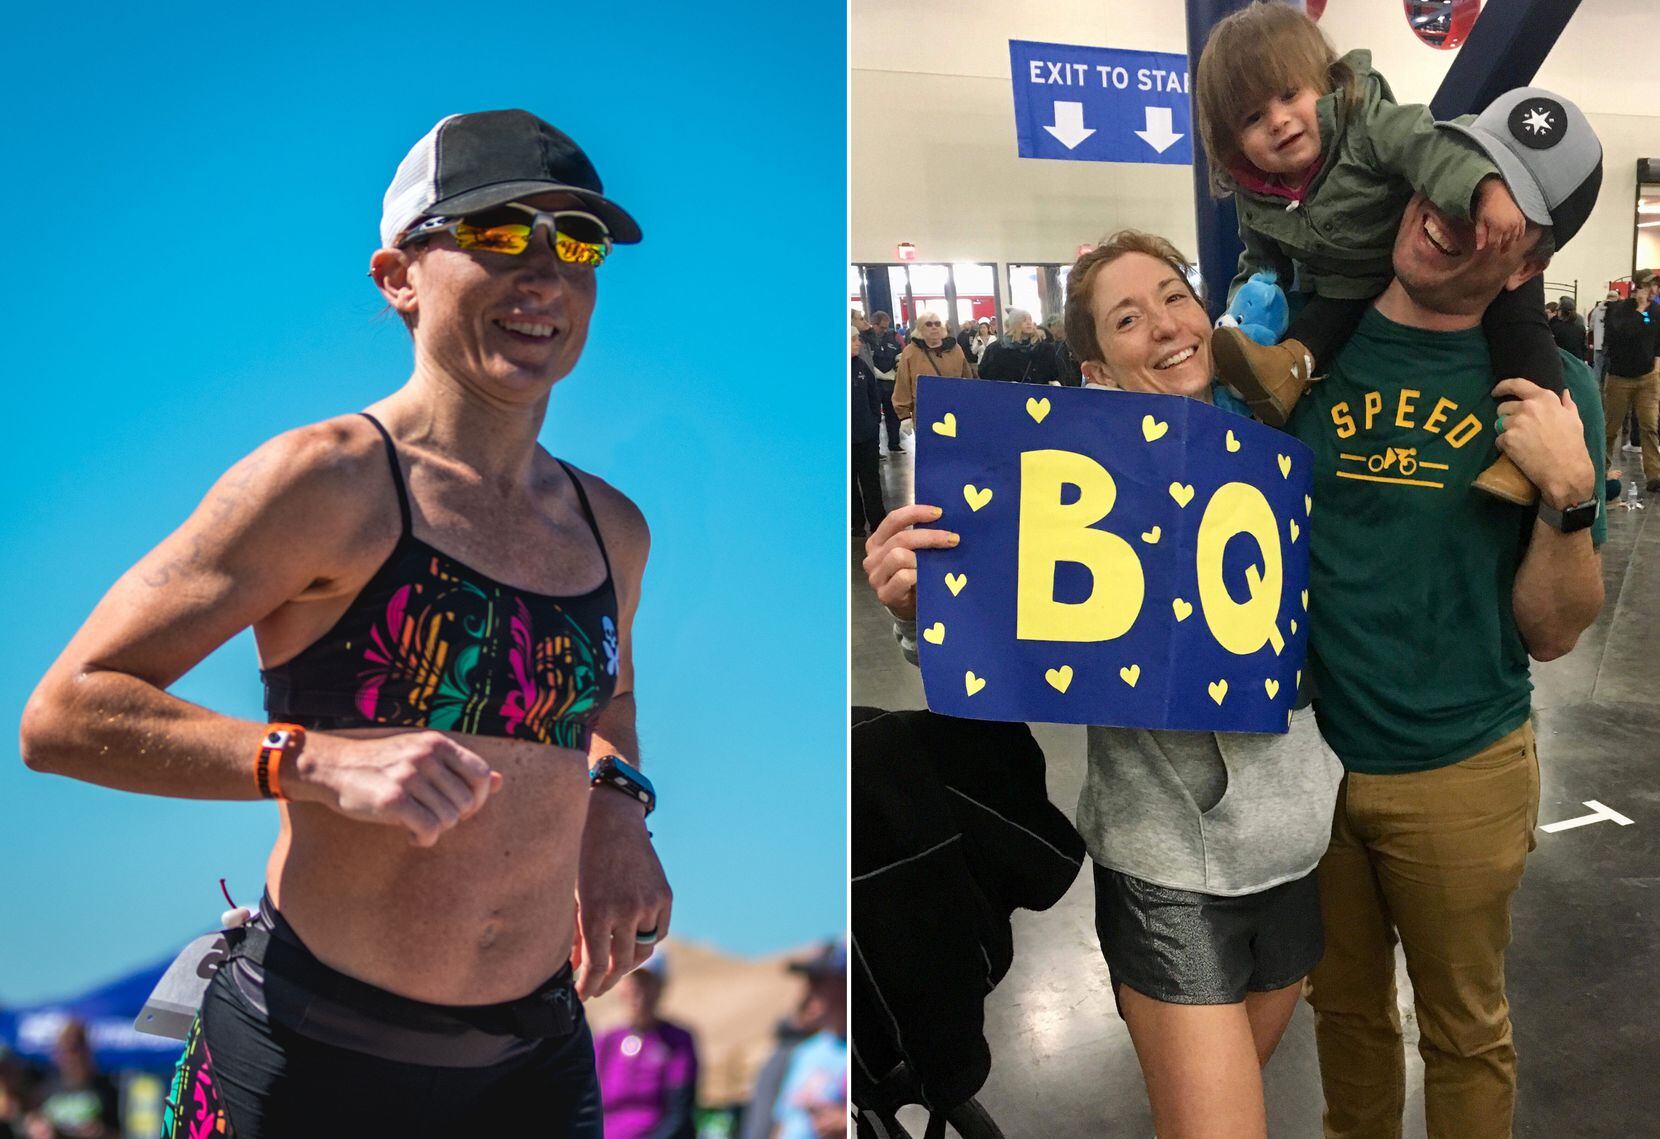 Brandi Swicegood (left) during the run portion of the Longhorn Ironman 70.3 in Austin in October 2017, and (right) celebrating her Boston-qualifying finish time at the Chevron Houston Marathon on Jan. 14, 2018, with husband Travis and daughter Adaline.